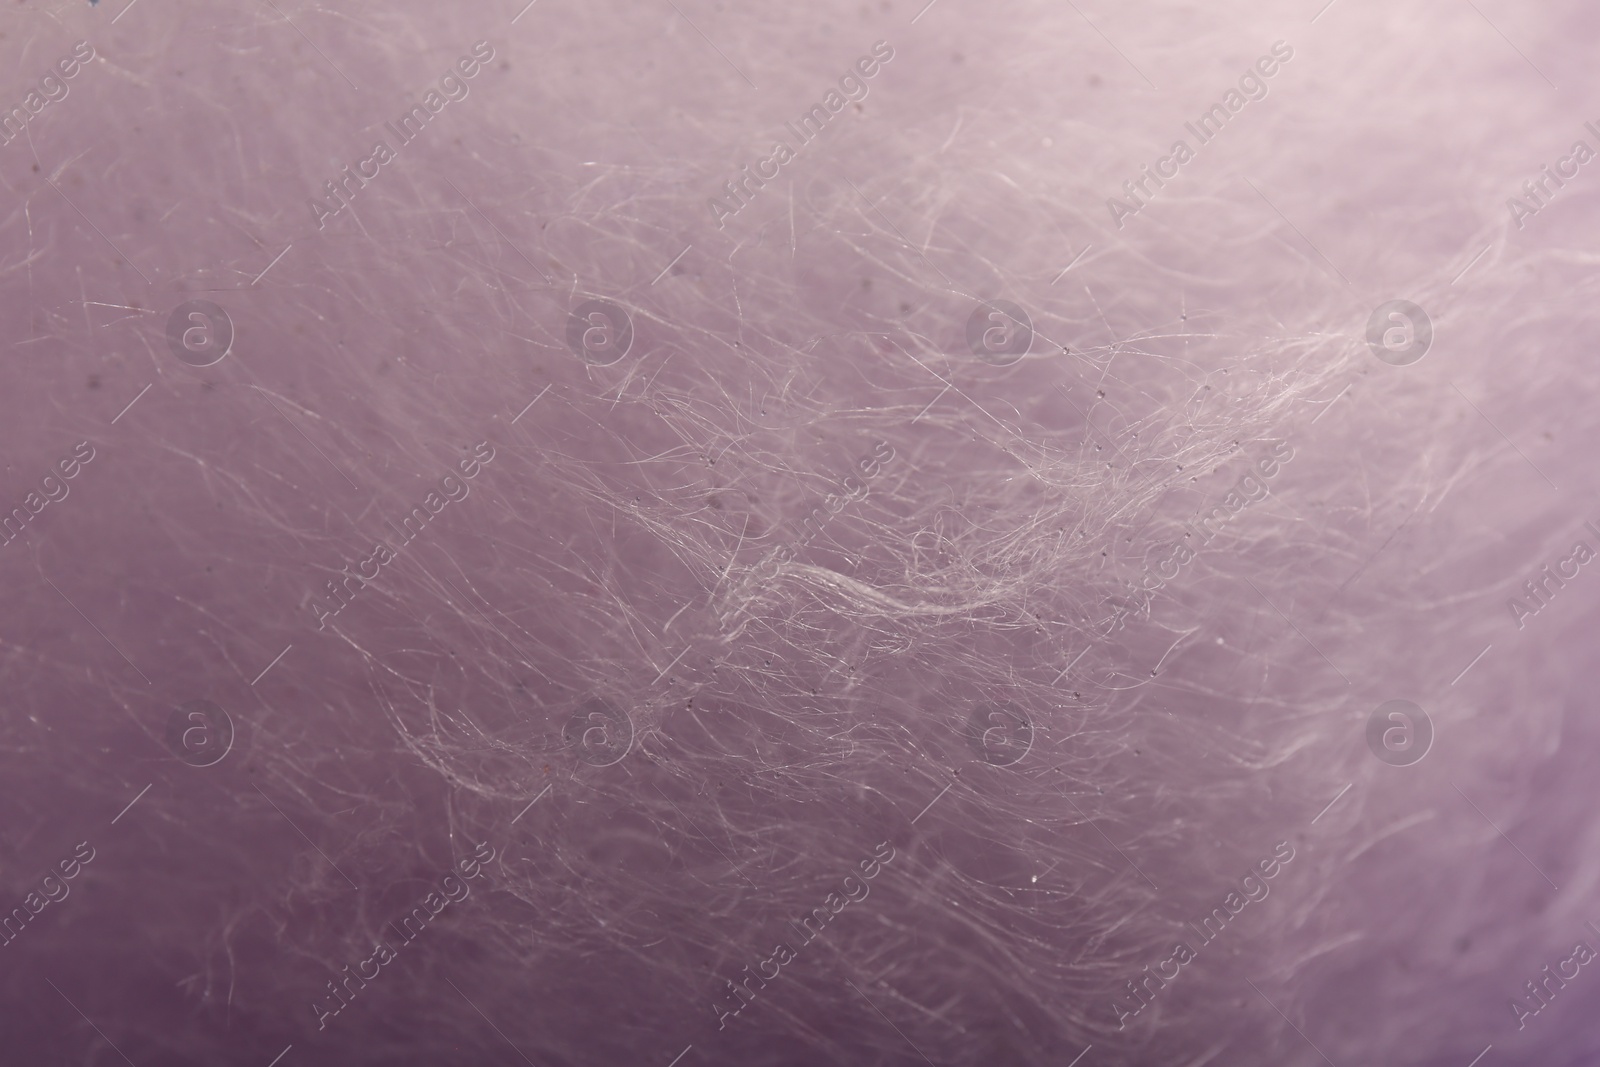 Photo of Purple cotton candy as background, closeup view